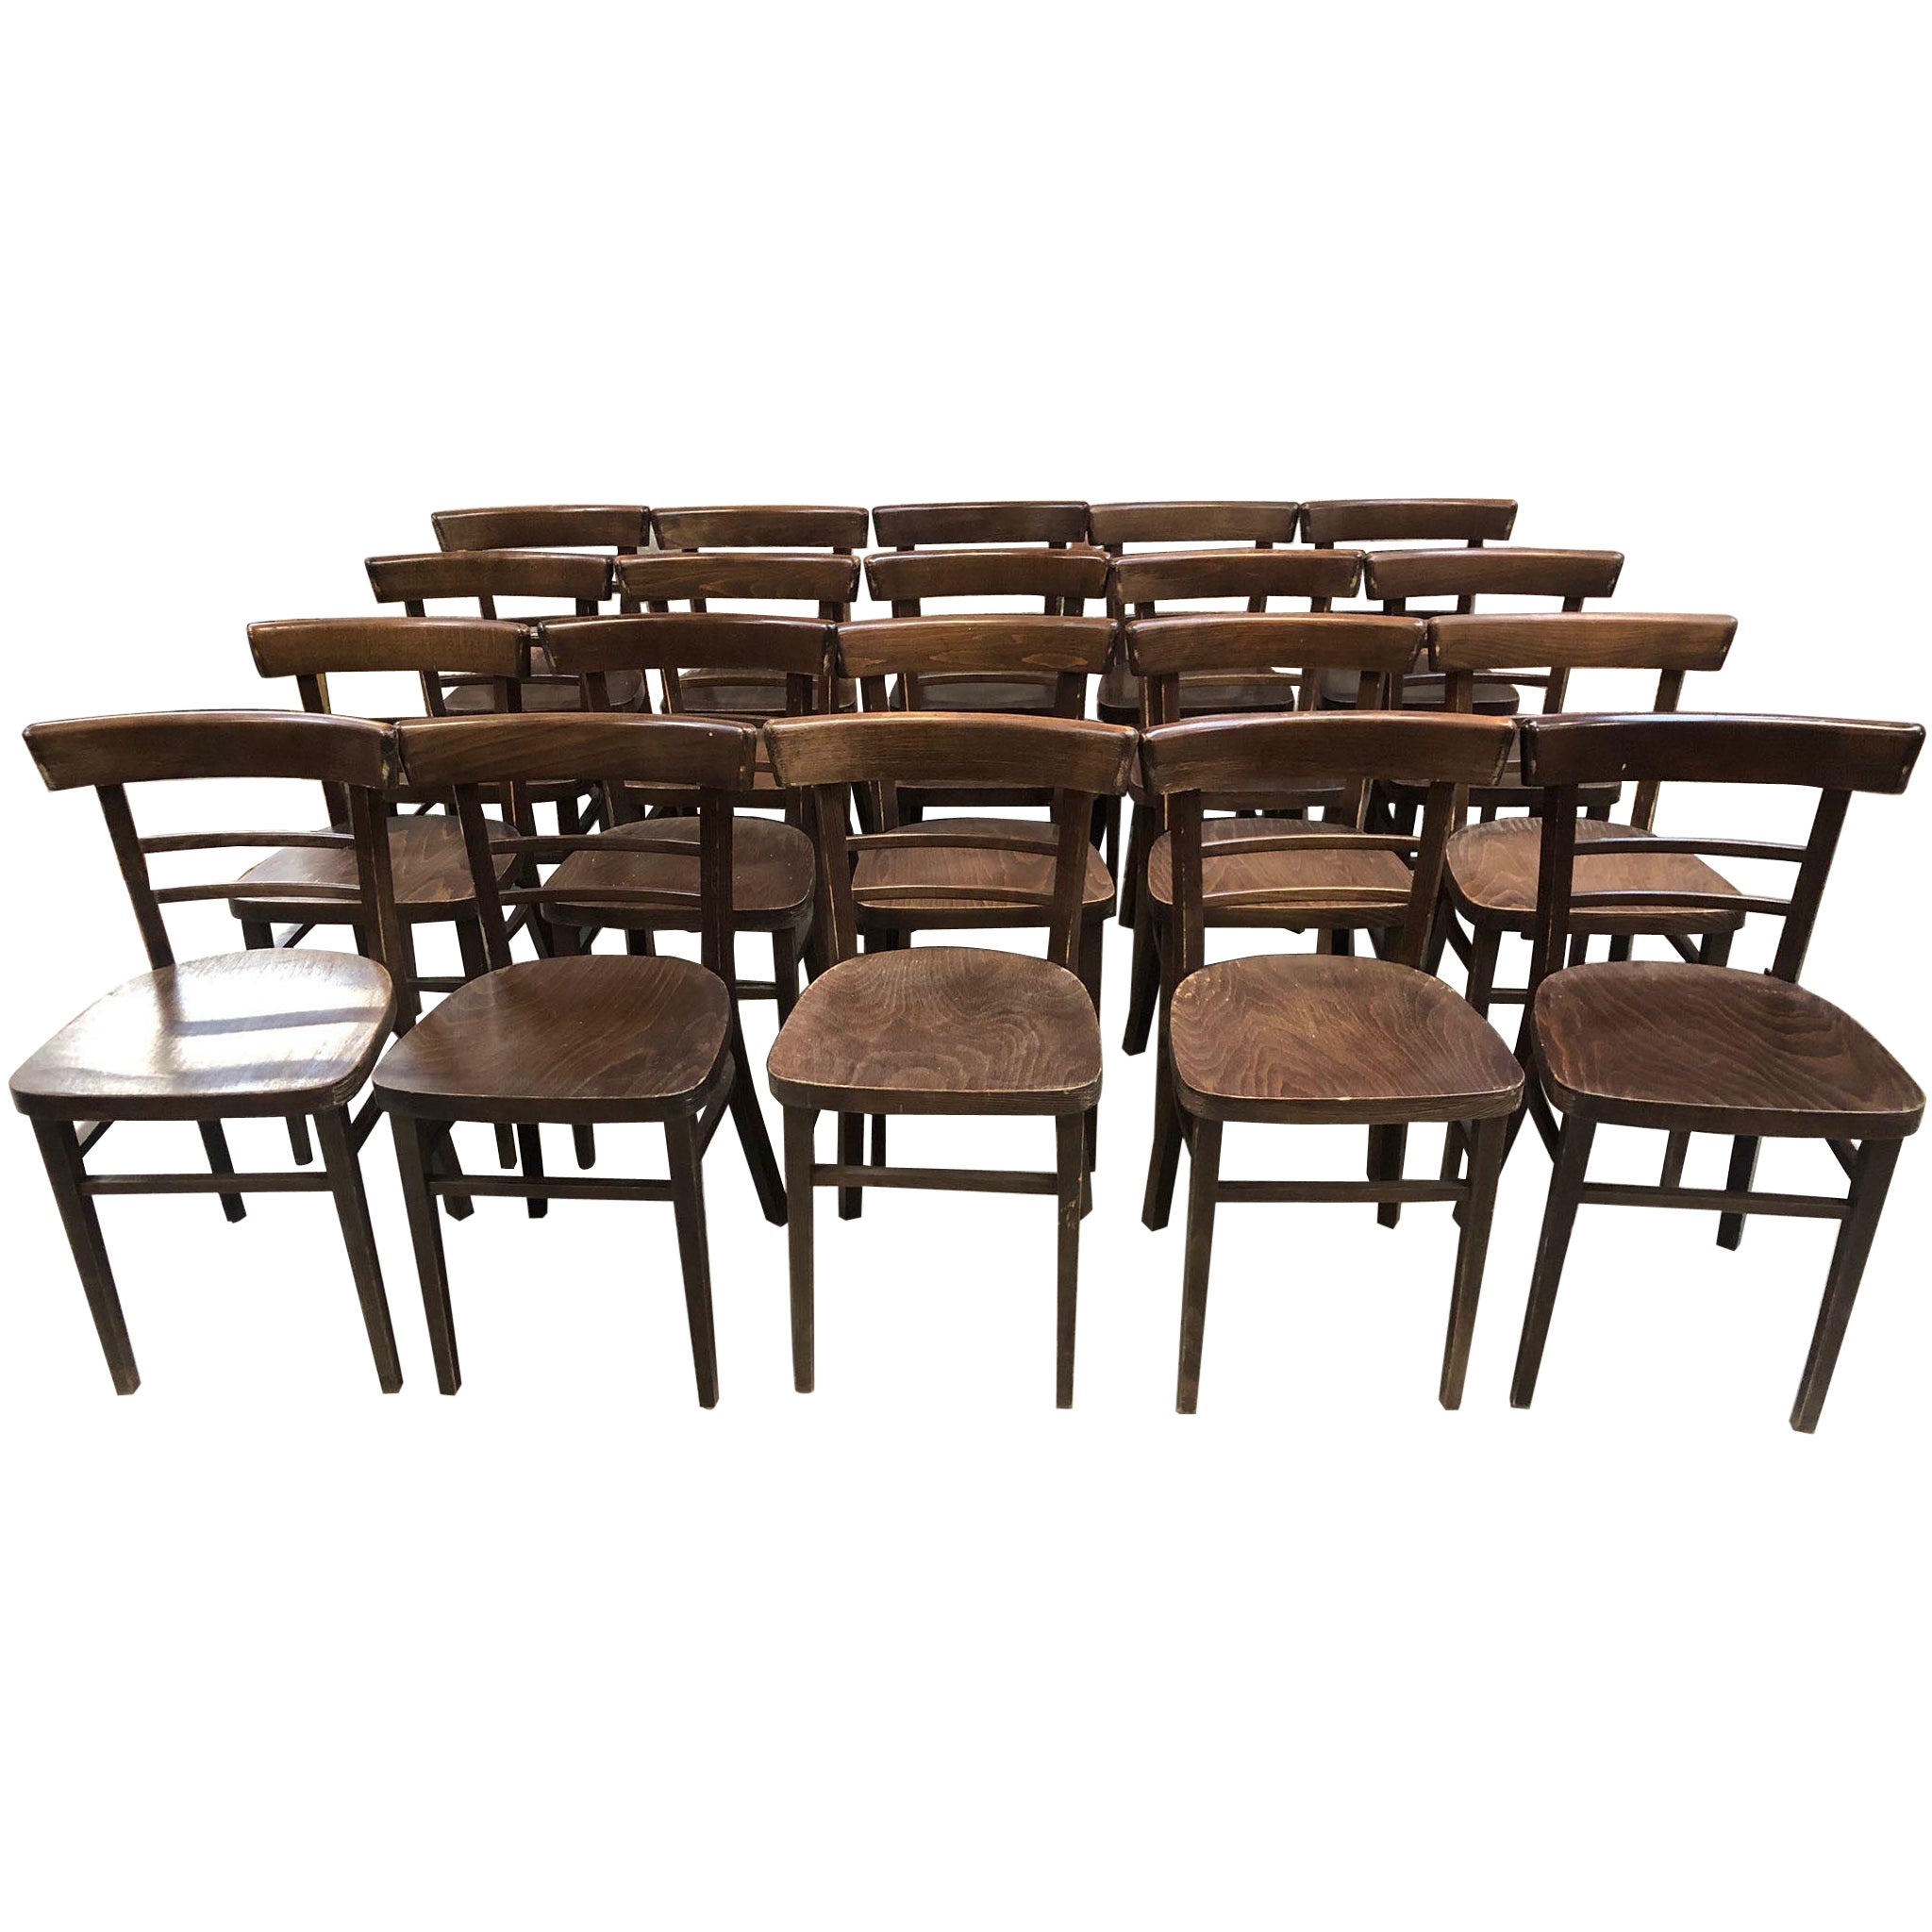 Classic bistro chairs For Sale